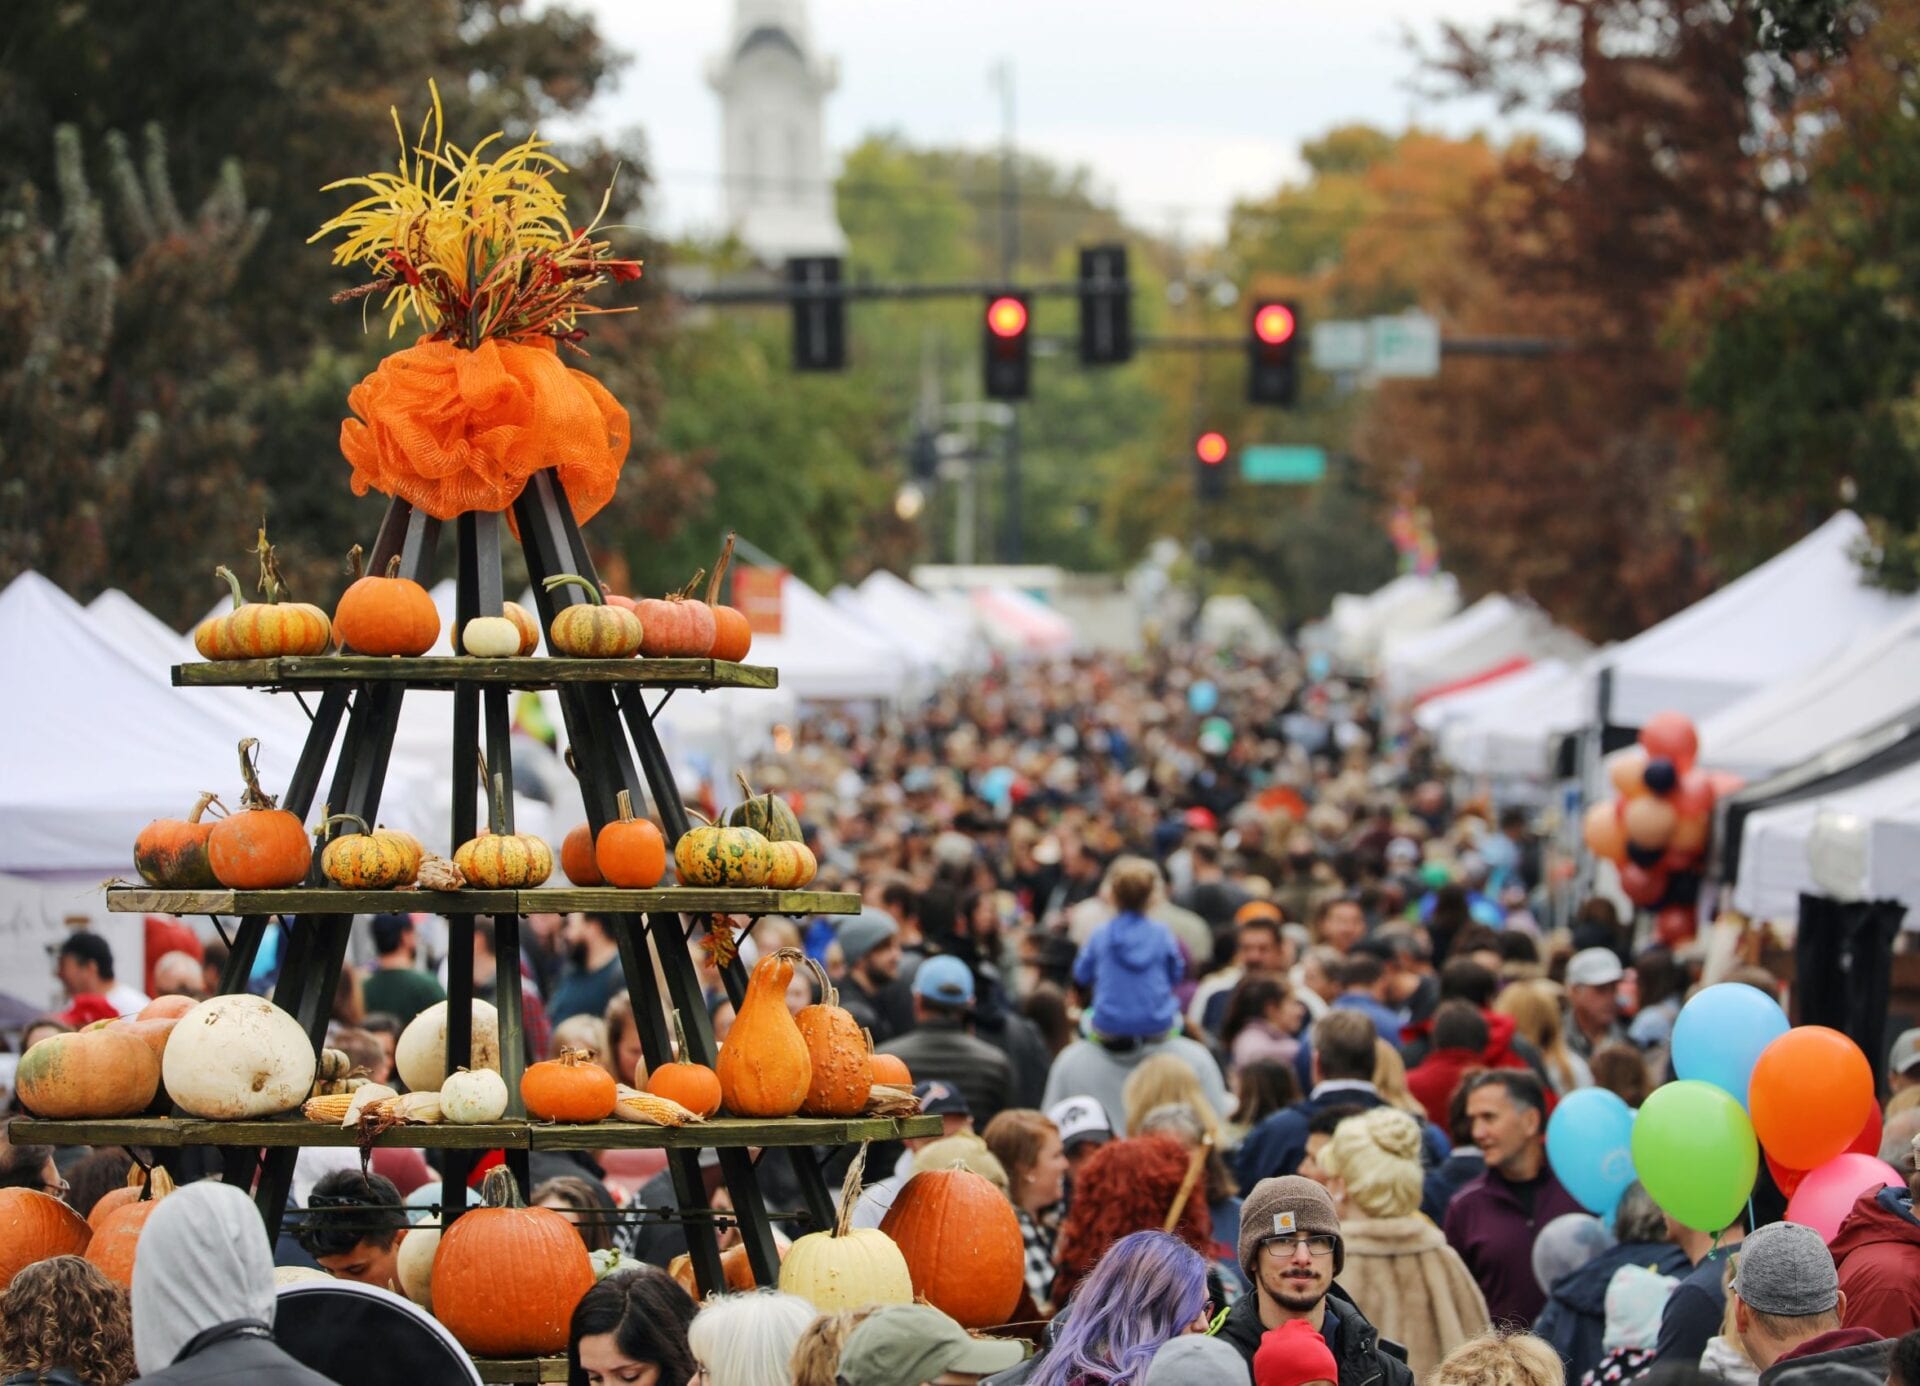 HERITAGE FOUNDATION’S PUMPKINFEST TO RETURN TO DOWNTOWN FRANKLIN OCT